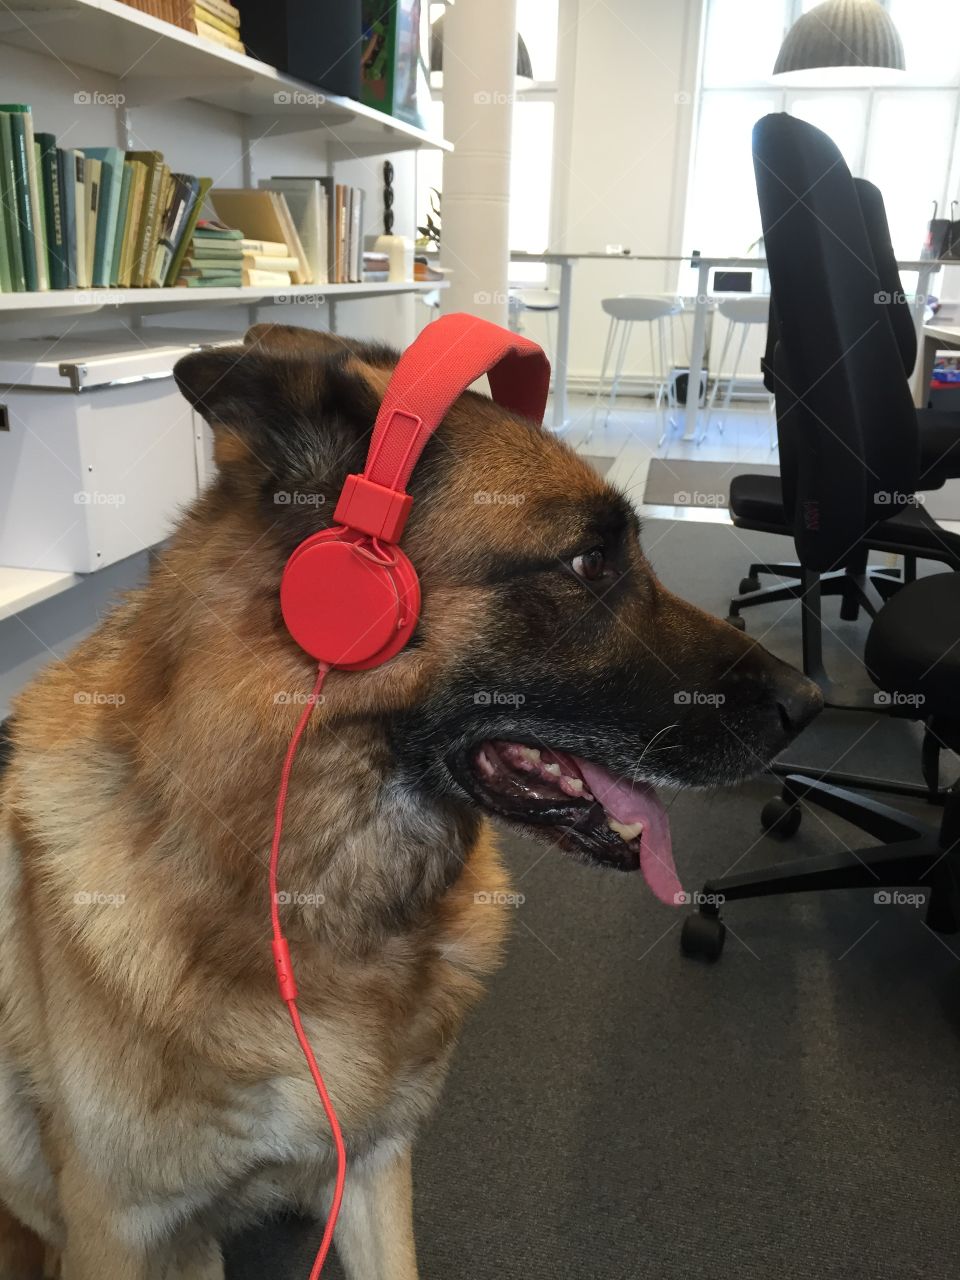 Dog at work listening to music with headphones 